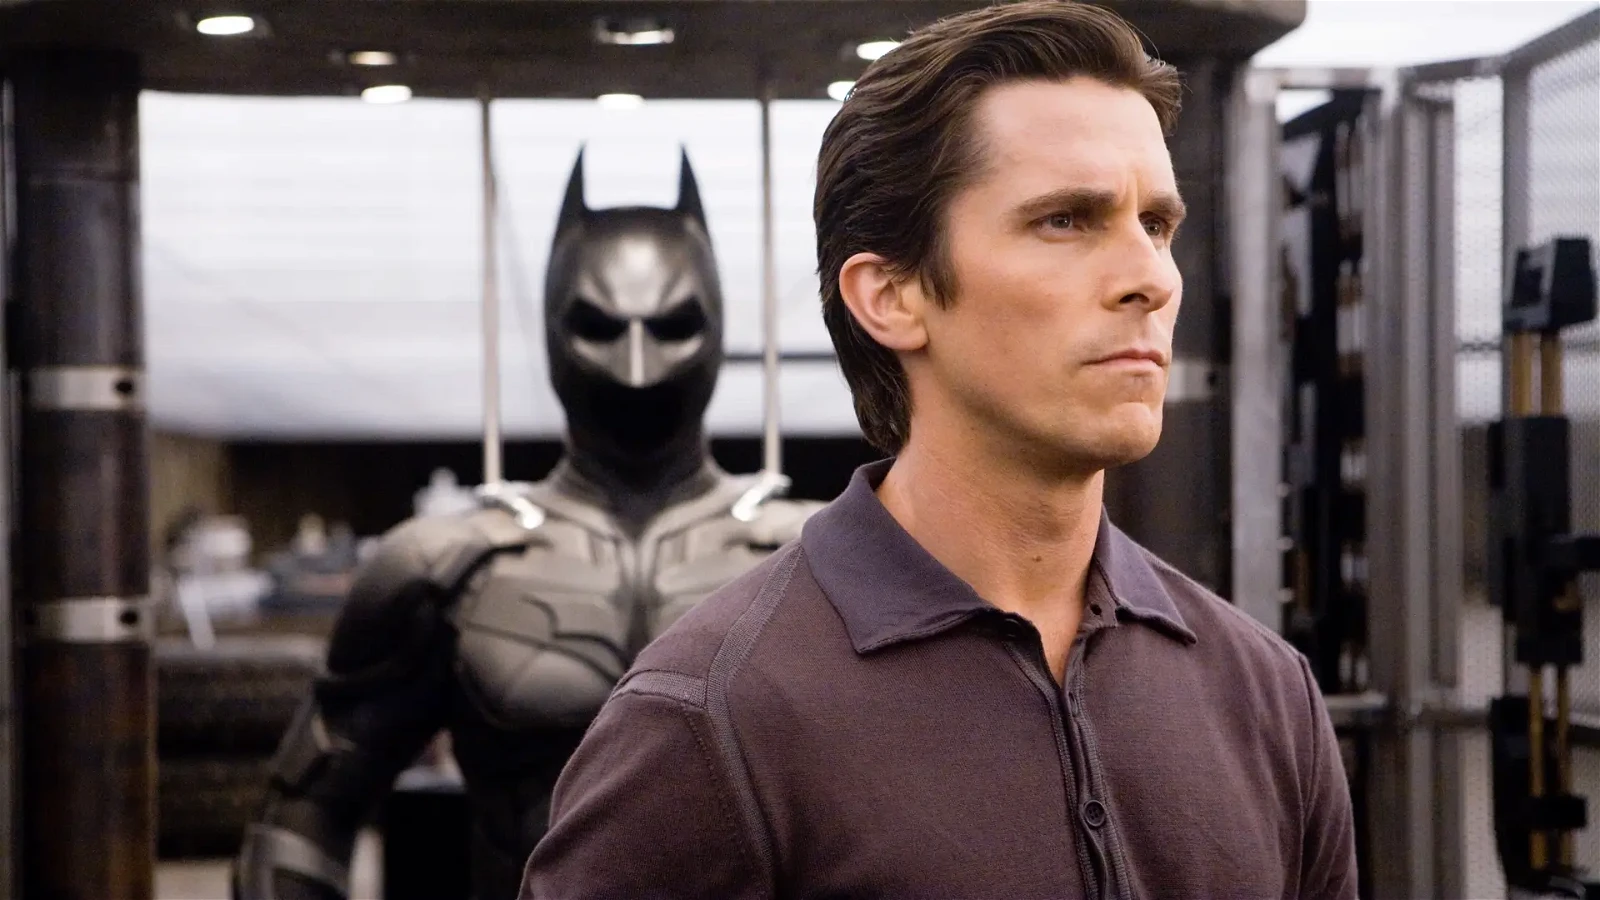 Christian Bale in a still from The Dark Knight (2008)